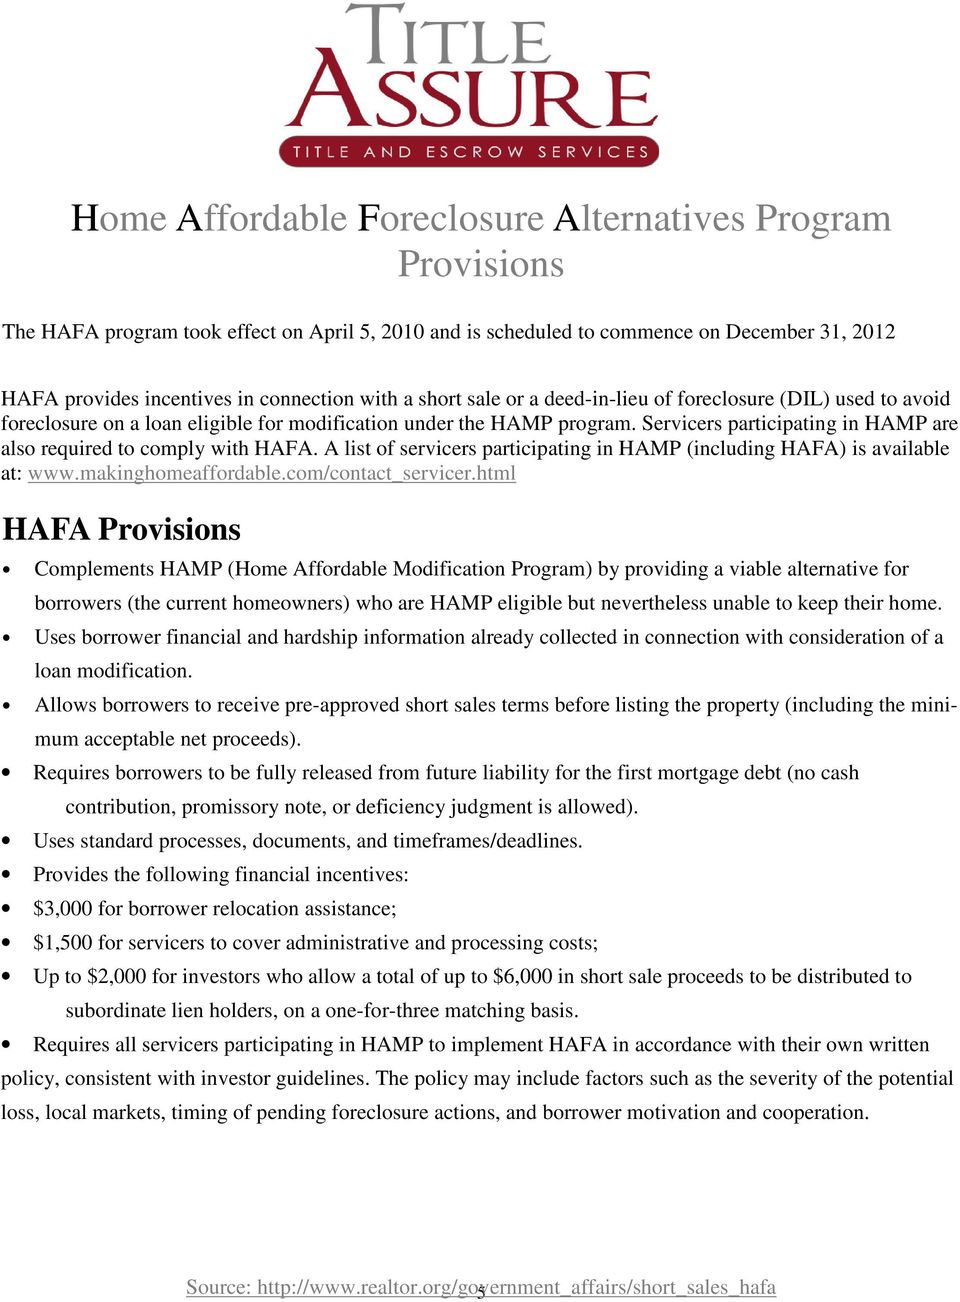 Servicers participating in HAMP are also required to comply with HAFA. A list of servicers participating in HAMP (including HAFA) is available at: www.makinghomeaffordable.com/contact_servicer.